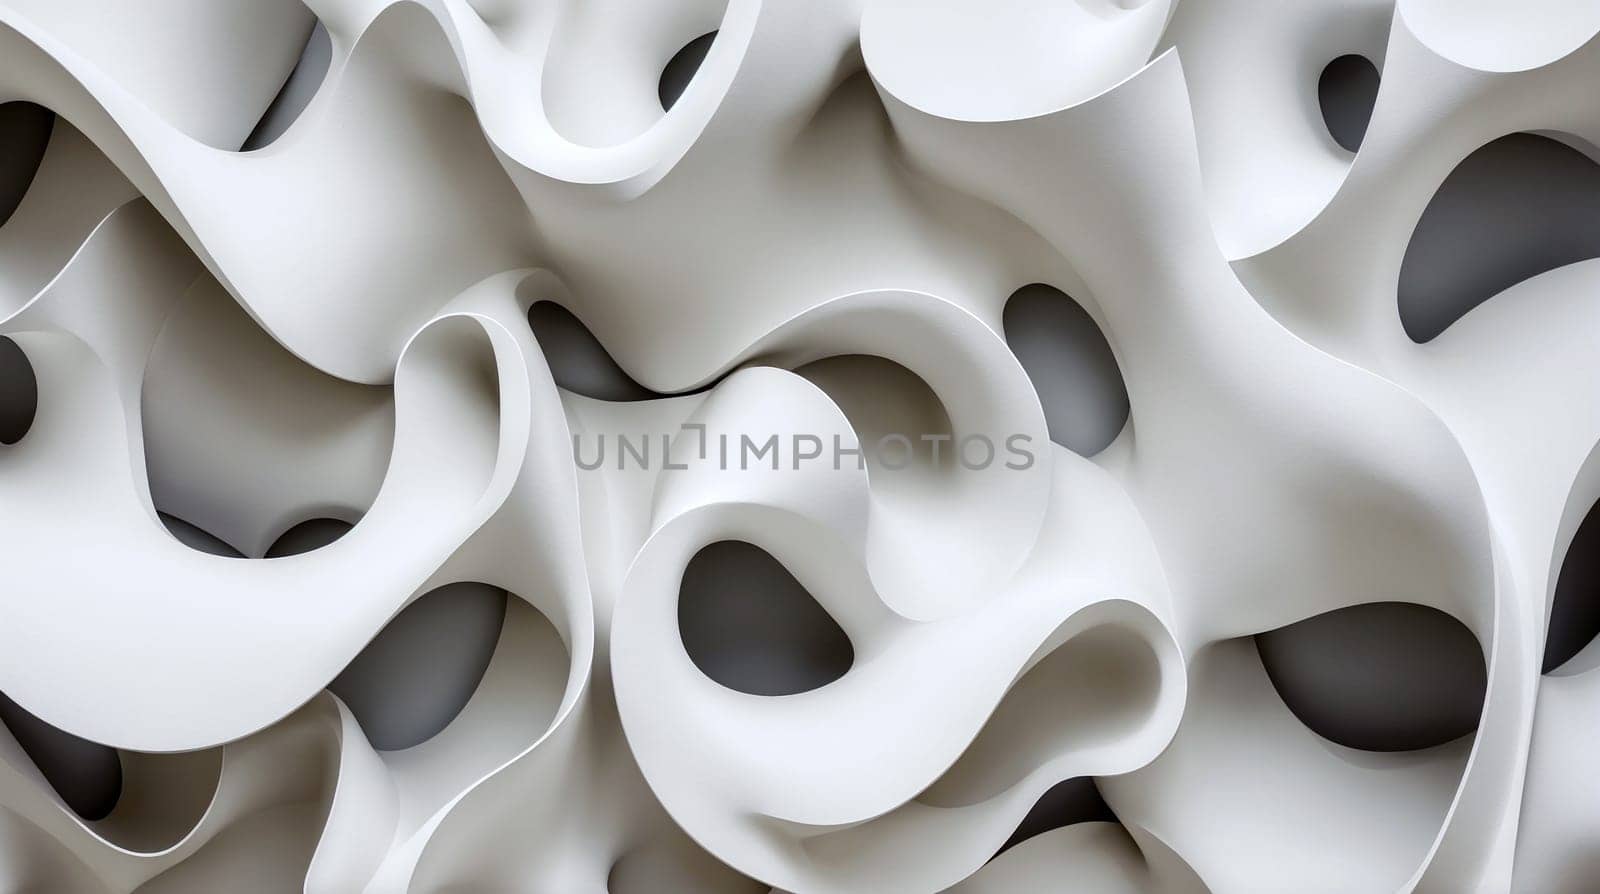 Abstract Organic White Wall Sculpture in Close-Up View by chrisroll